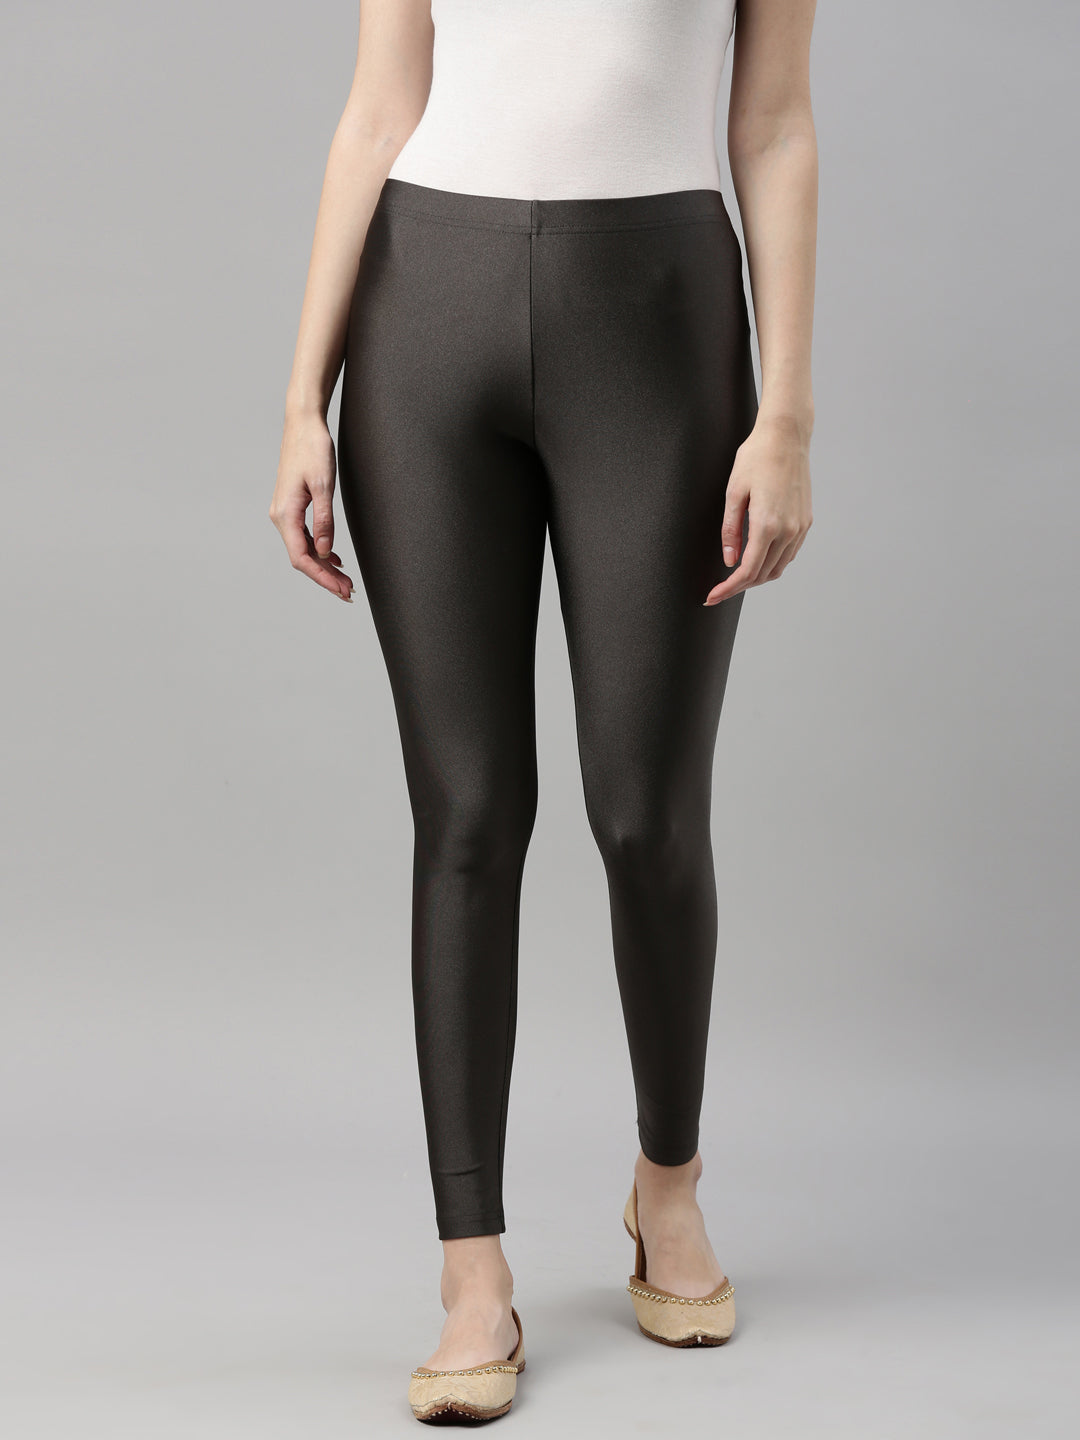 Buy Activewear Ankle Length Tights in Dark Grey Online India, Best Prices,  COD - Clovia - AB0049P05